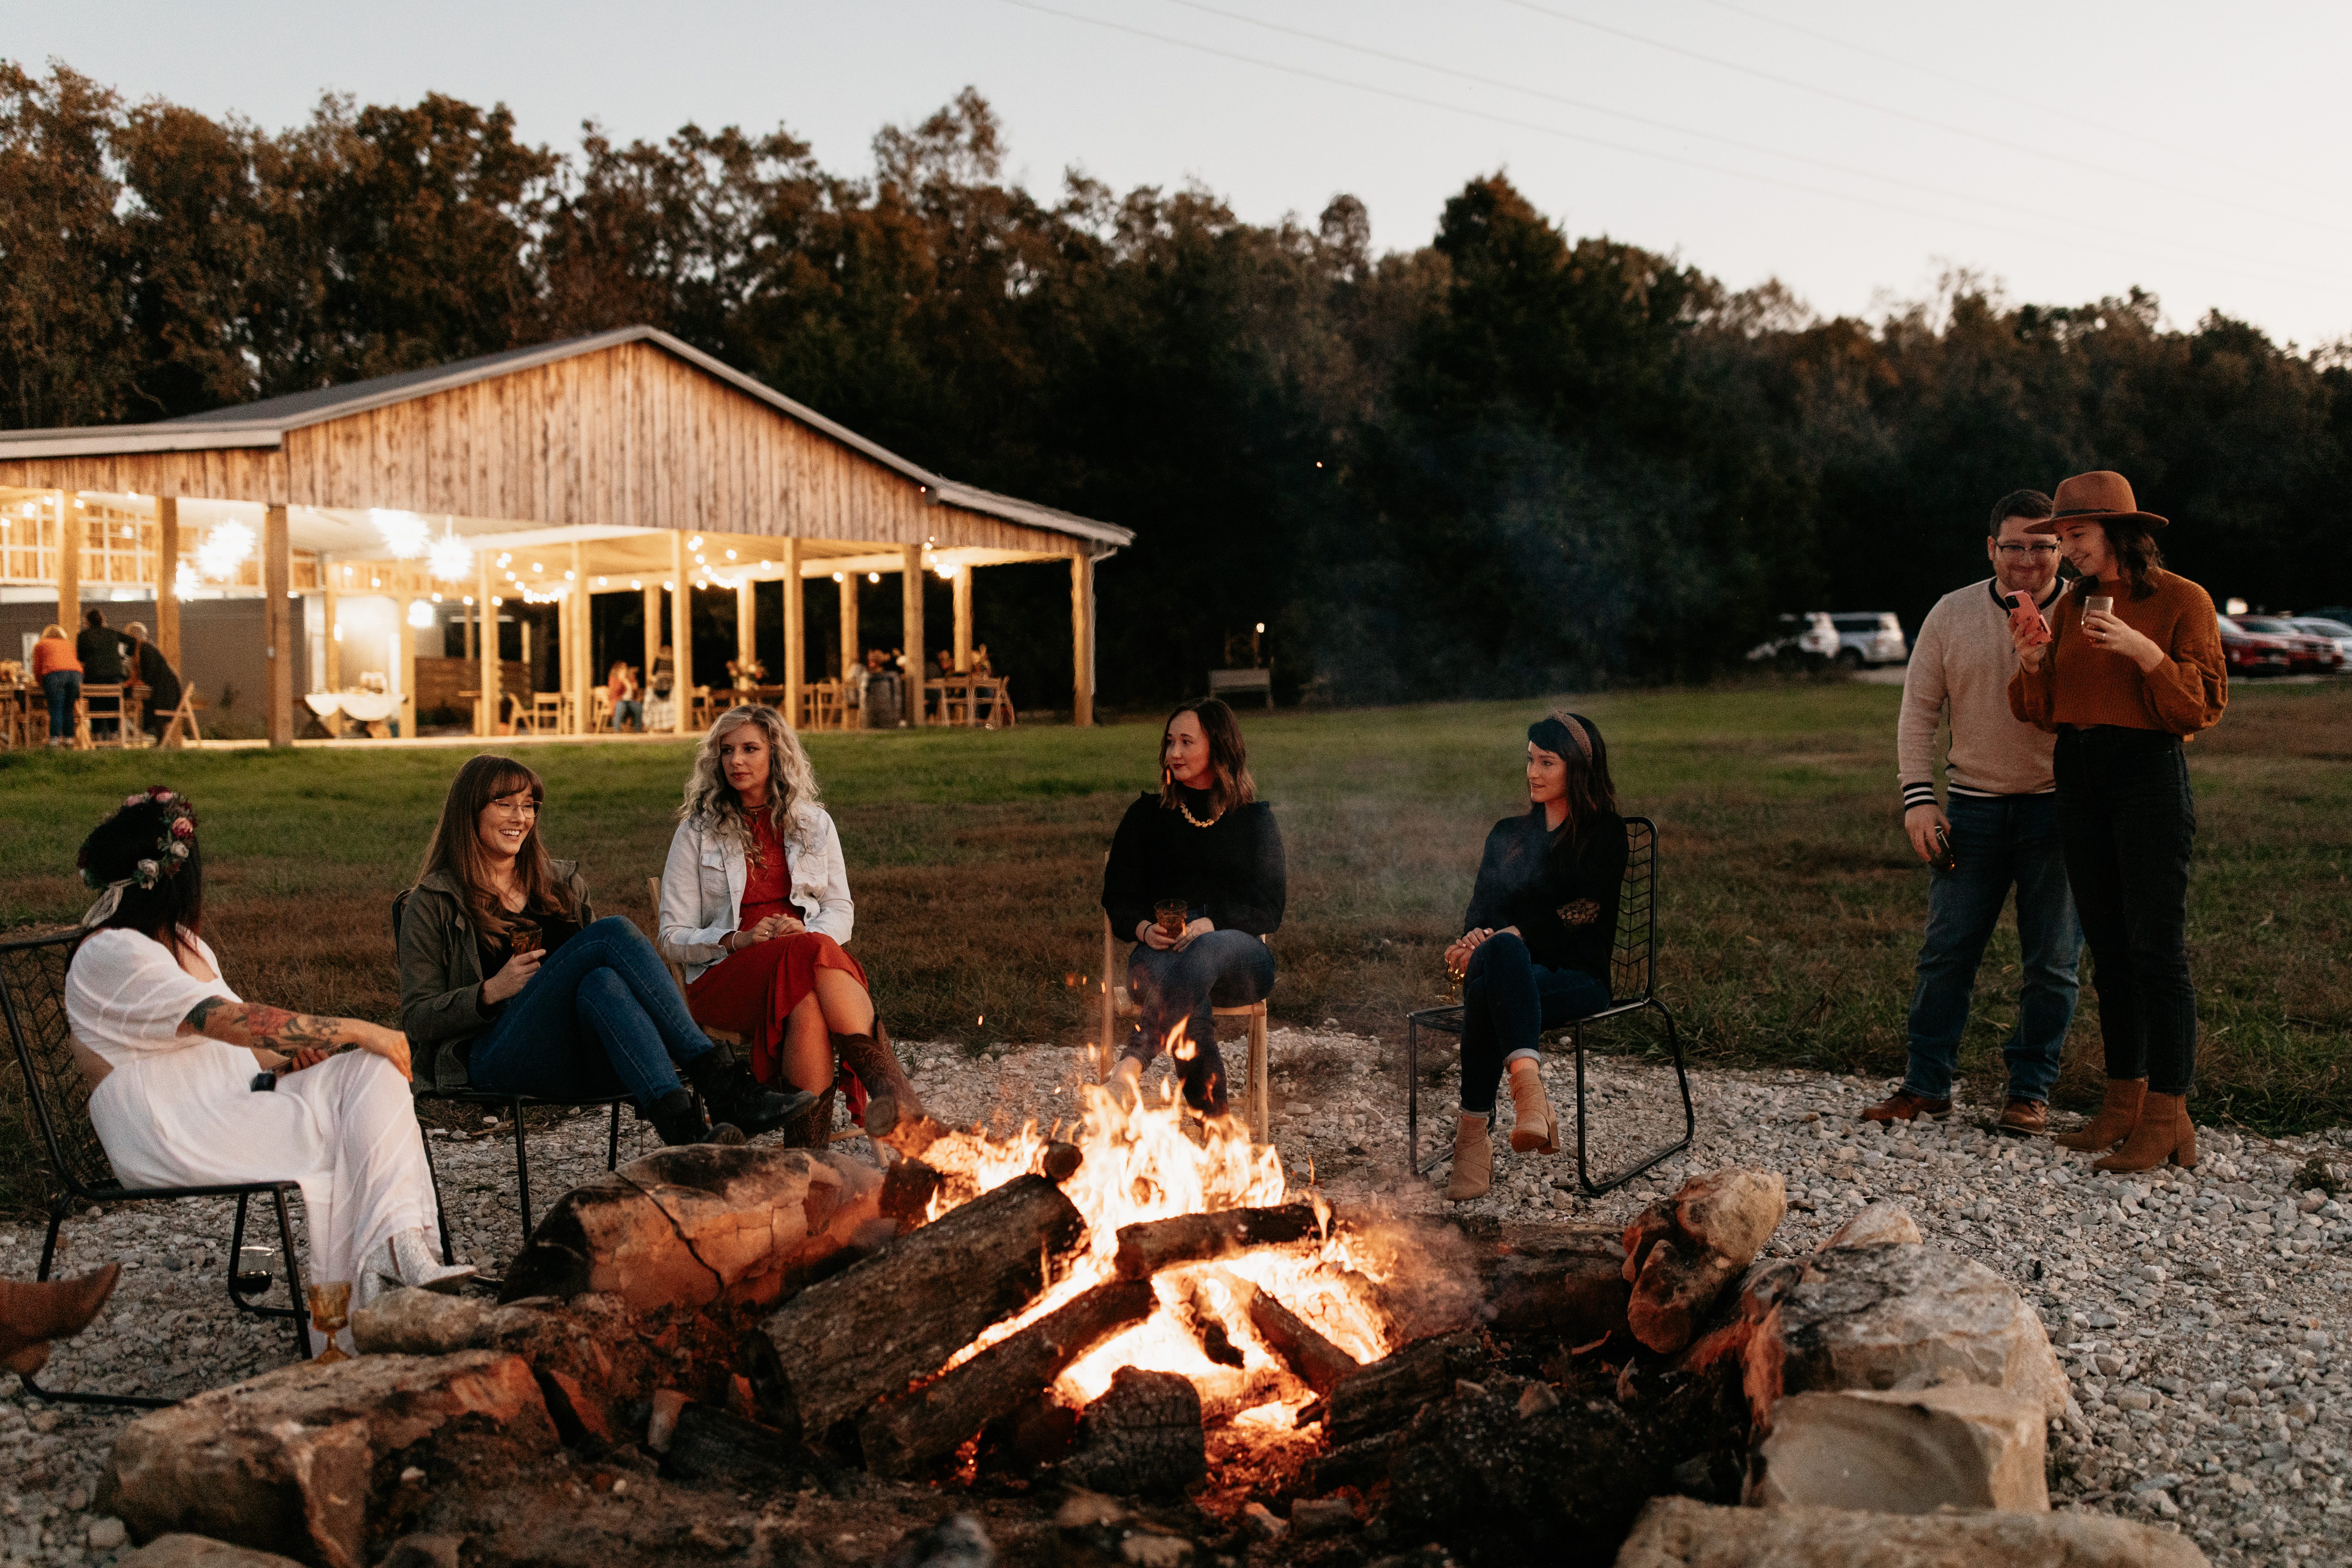 A group of guests talks and laughs around a fire pit at sunset, with a warmly lit barn in the far background.